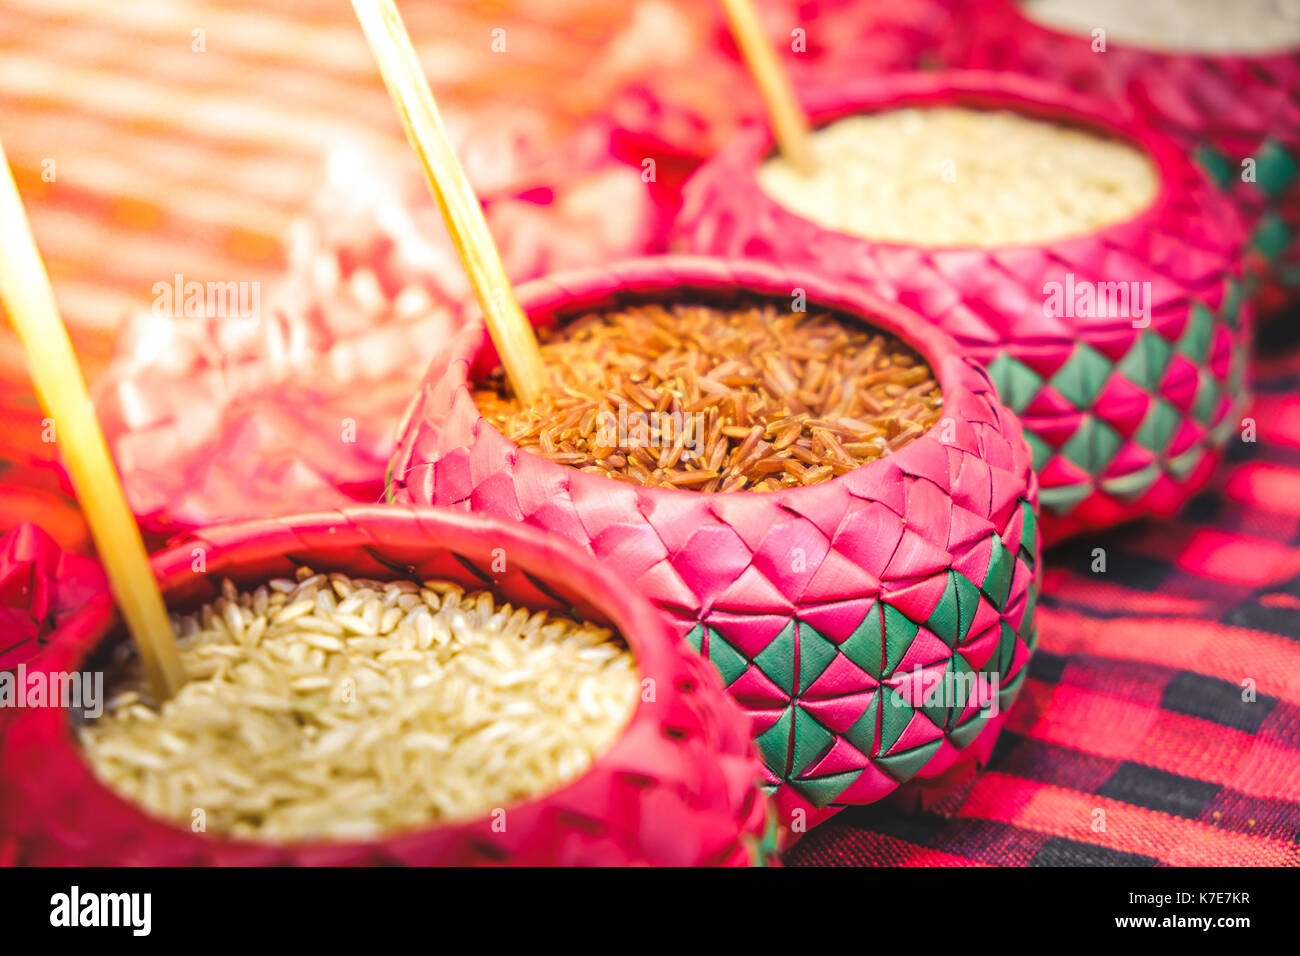 red rice purple bowl background whole grain rice various types of rice Stock Photo